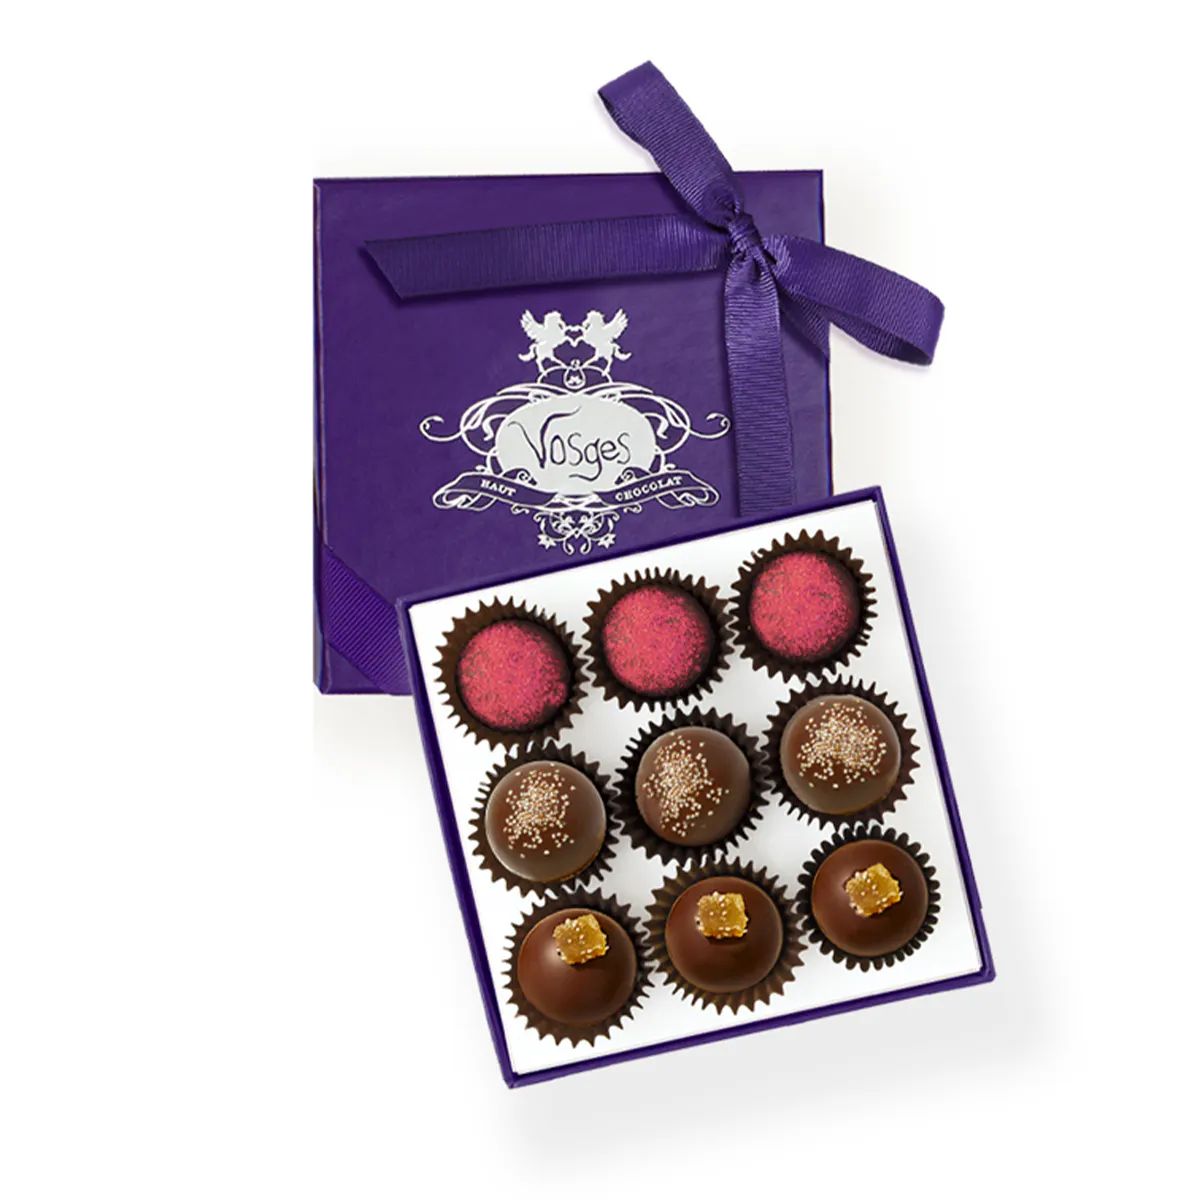 Vegan Truffle Collection - 9 Pieces by Vosges Haut-Chocolat | Goldbelly | Goldbelly